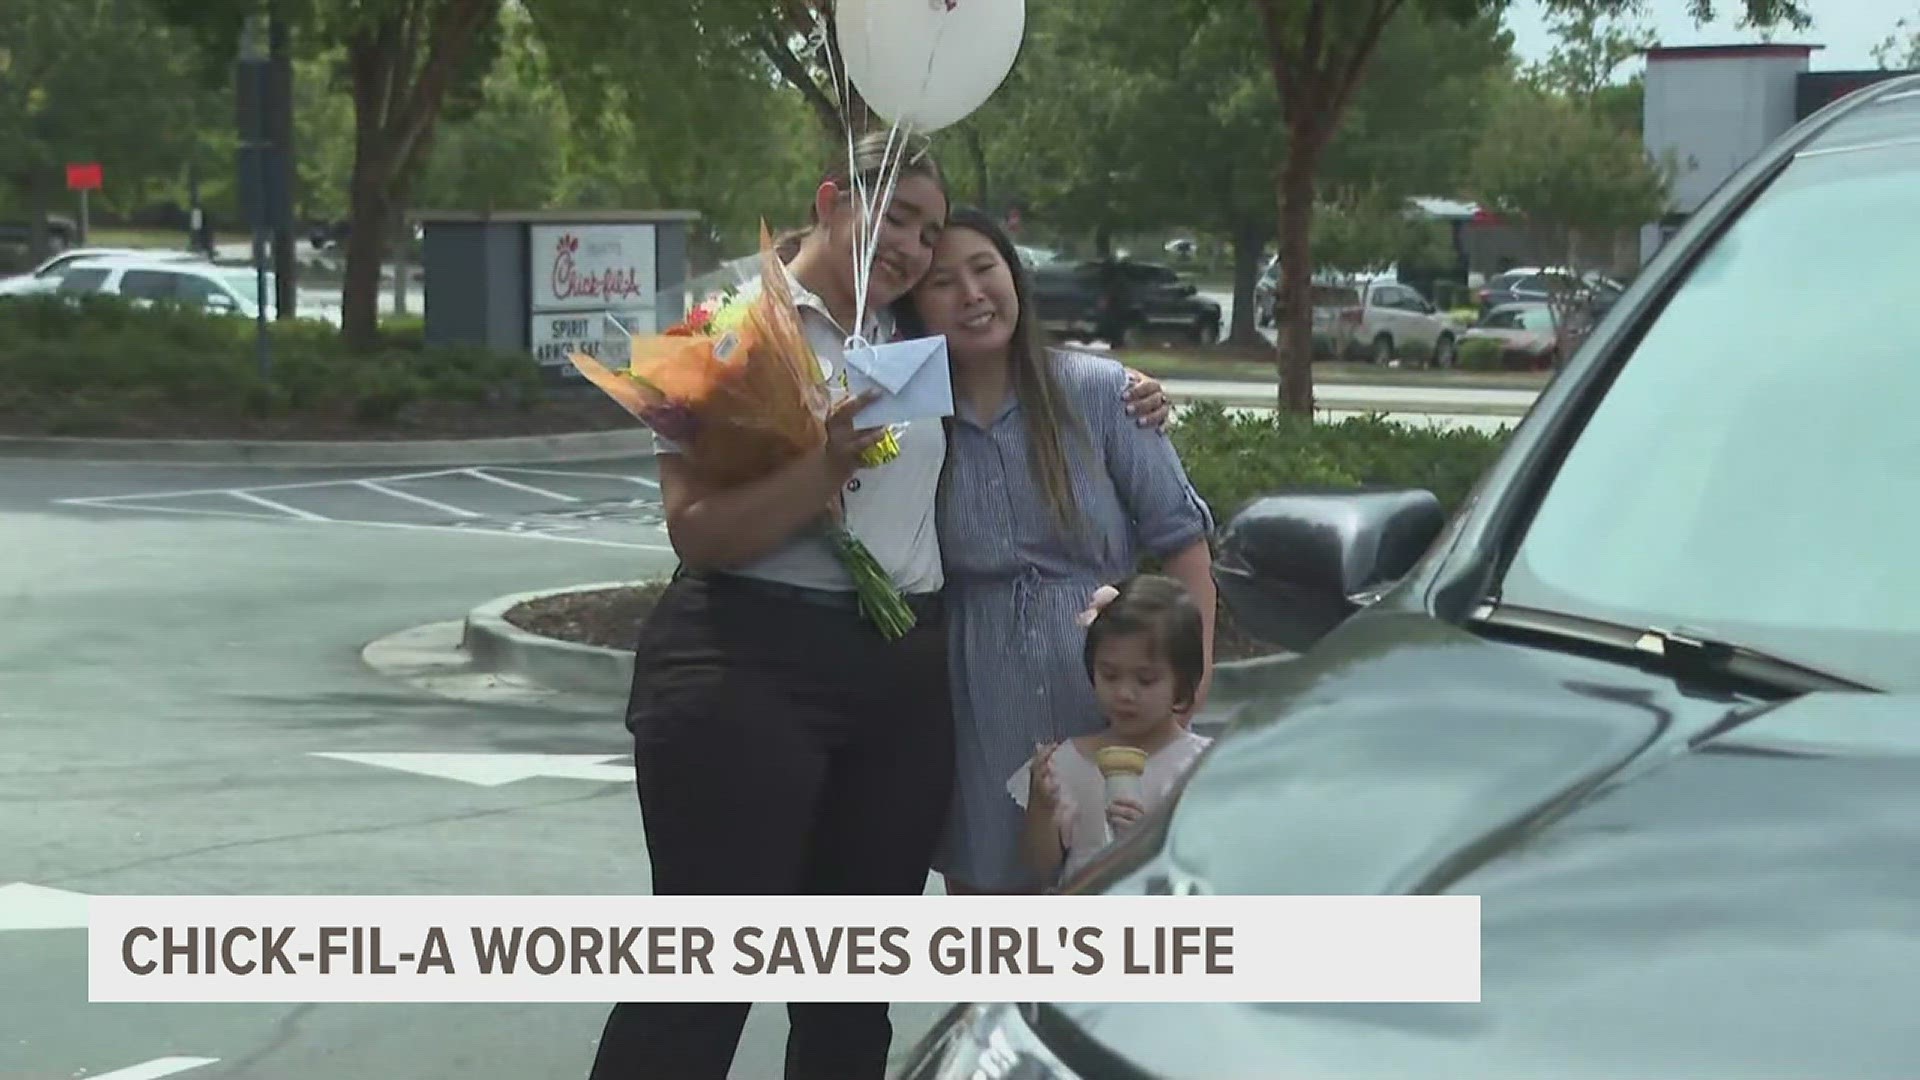 At an Atlanta Chick-fil-A one drive-thru employee jumped into action when a girl started choking. The family meets back up with that heroic employee to thank her.